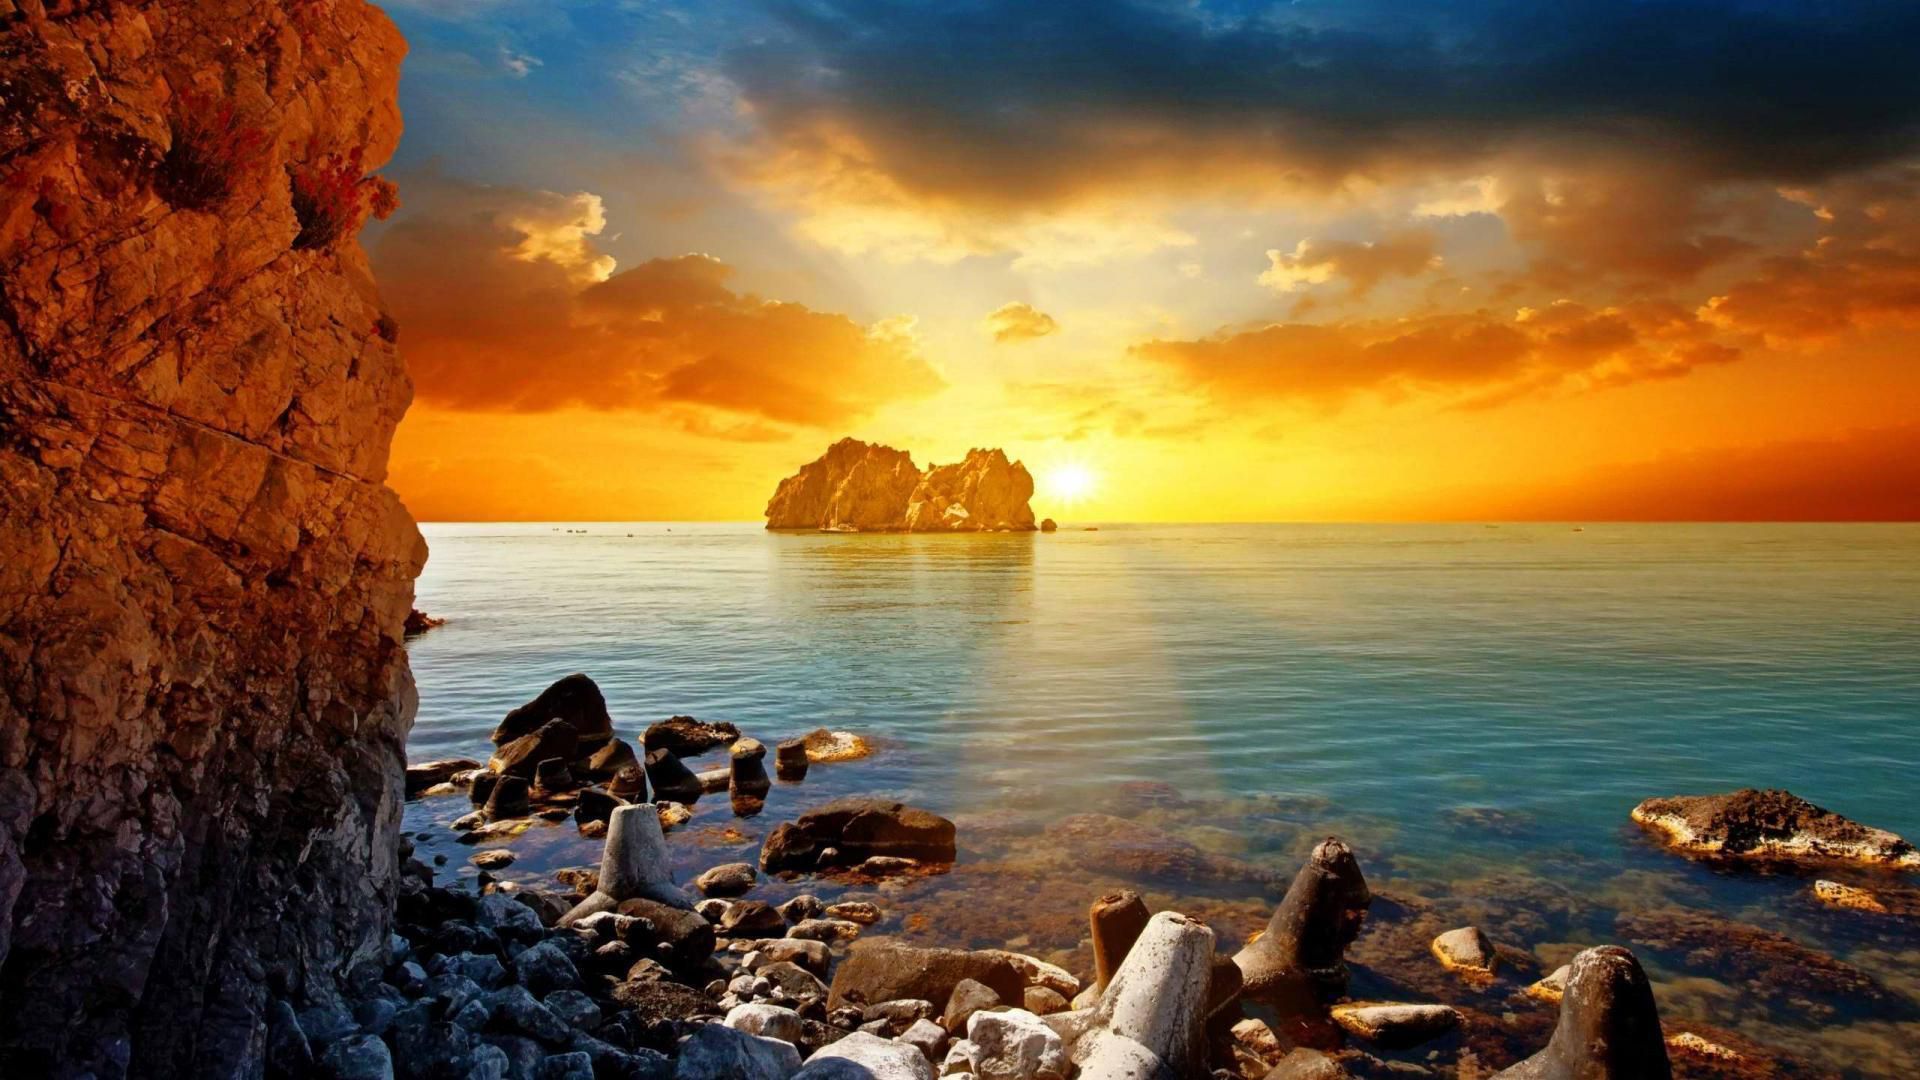 Sea And Rocks Under Cloudy Sky With Yellow Sunset HD Sunset Wallpaper